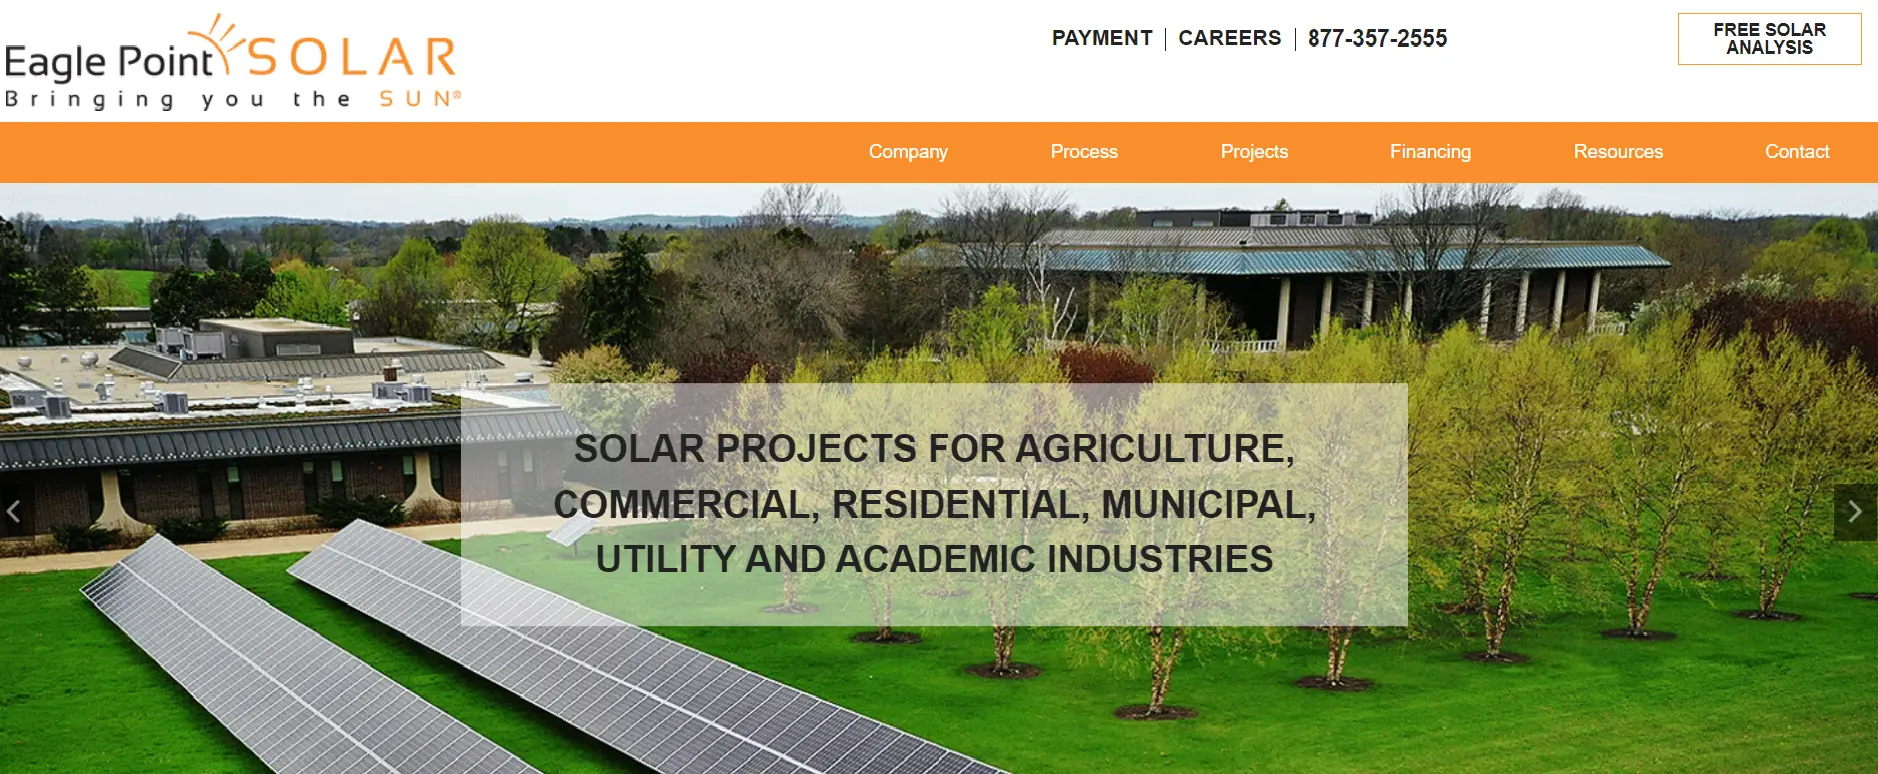 Eagle Point Solar website homepage